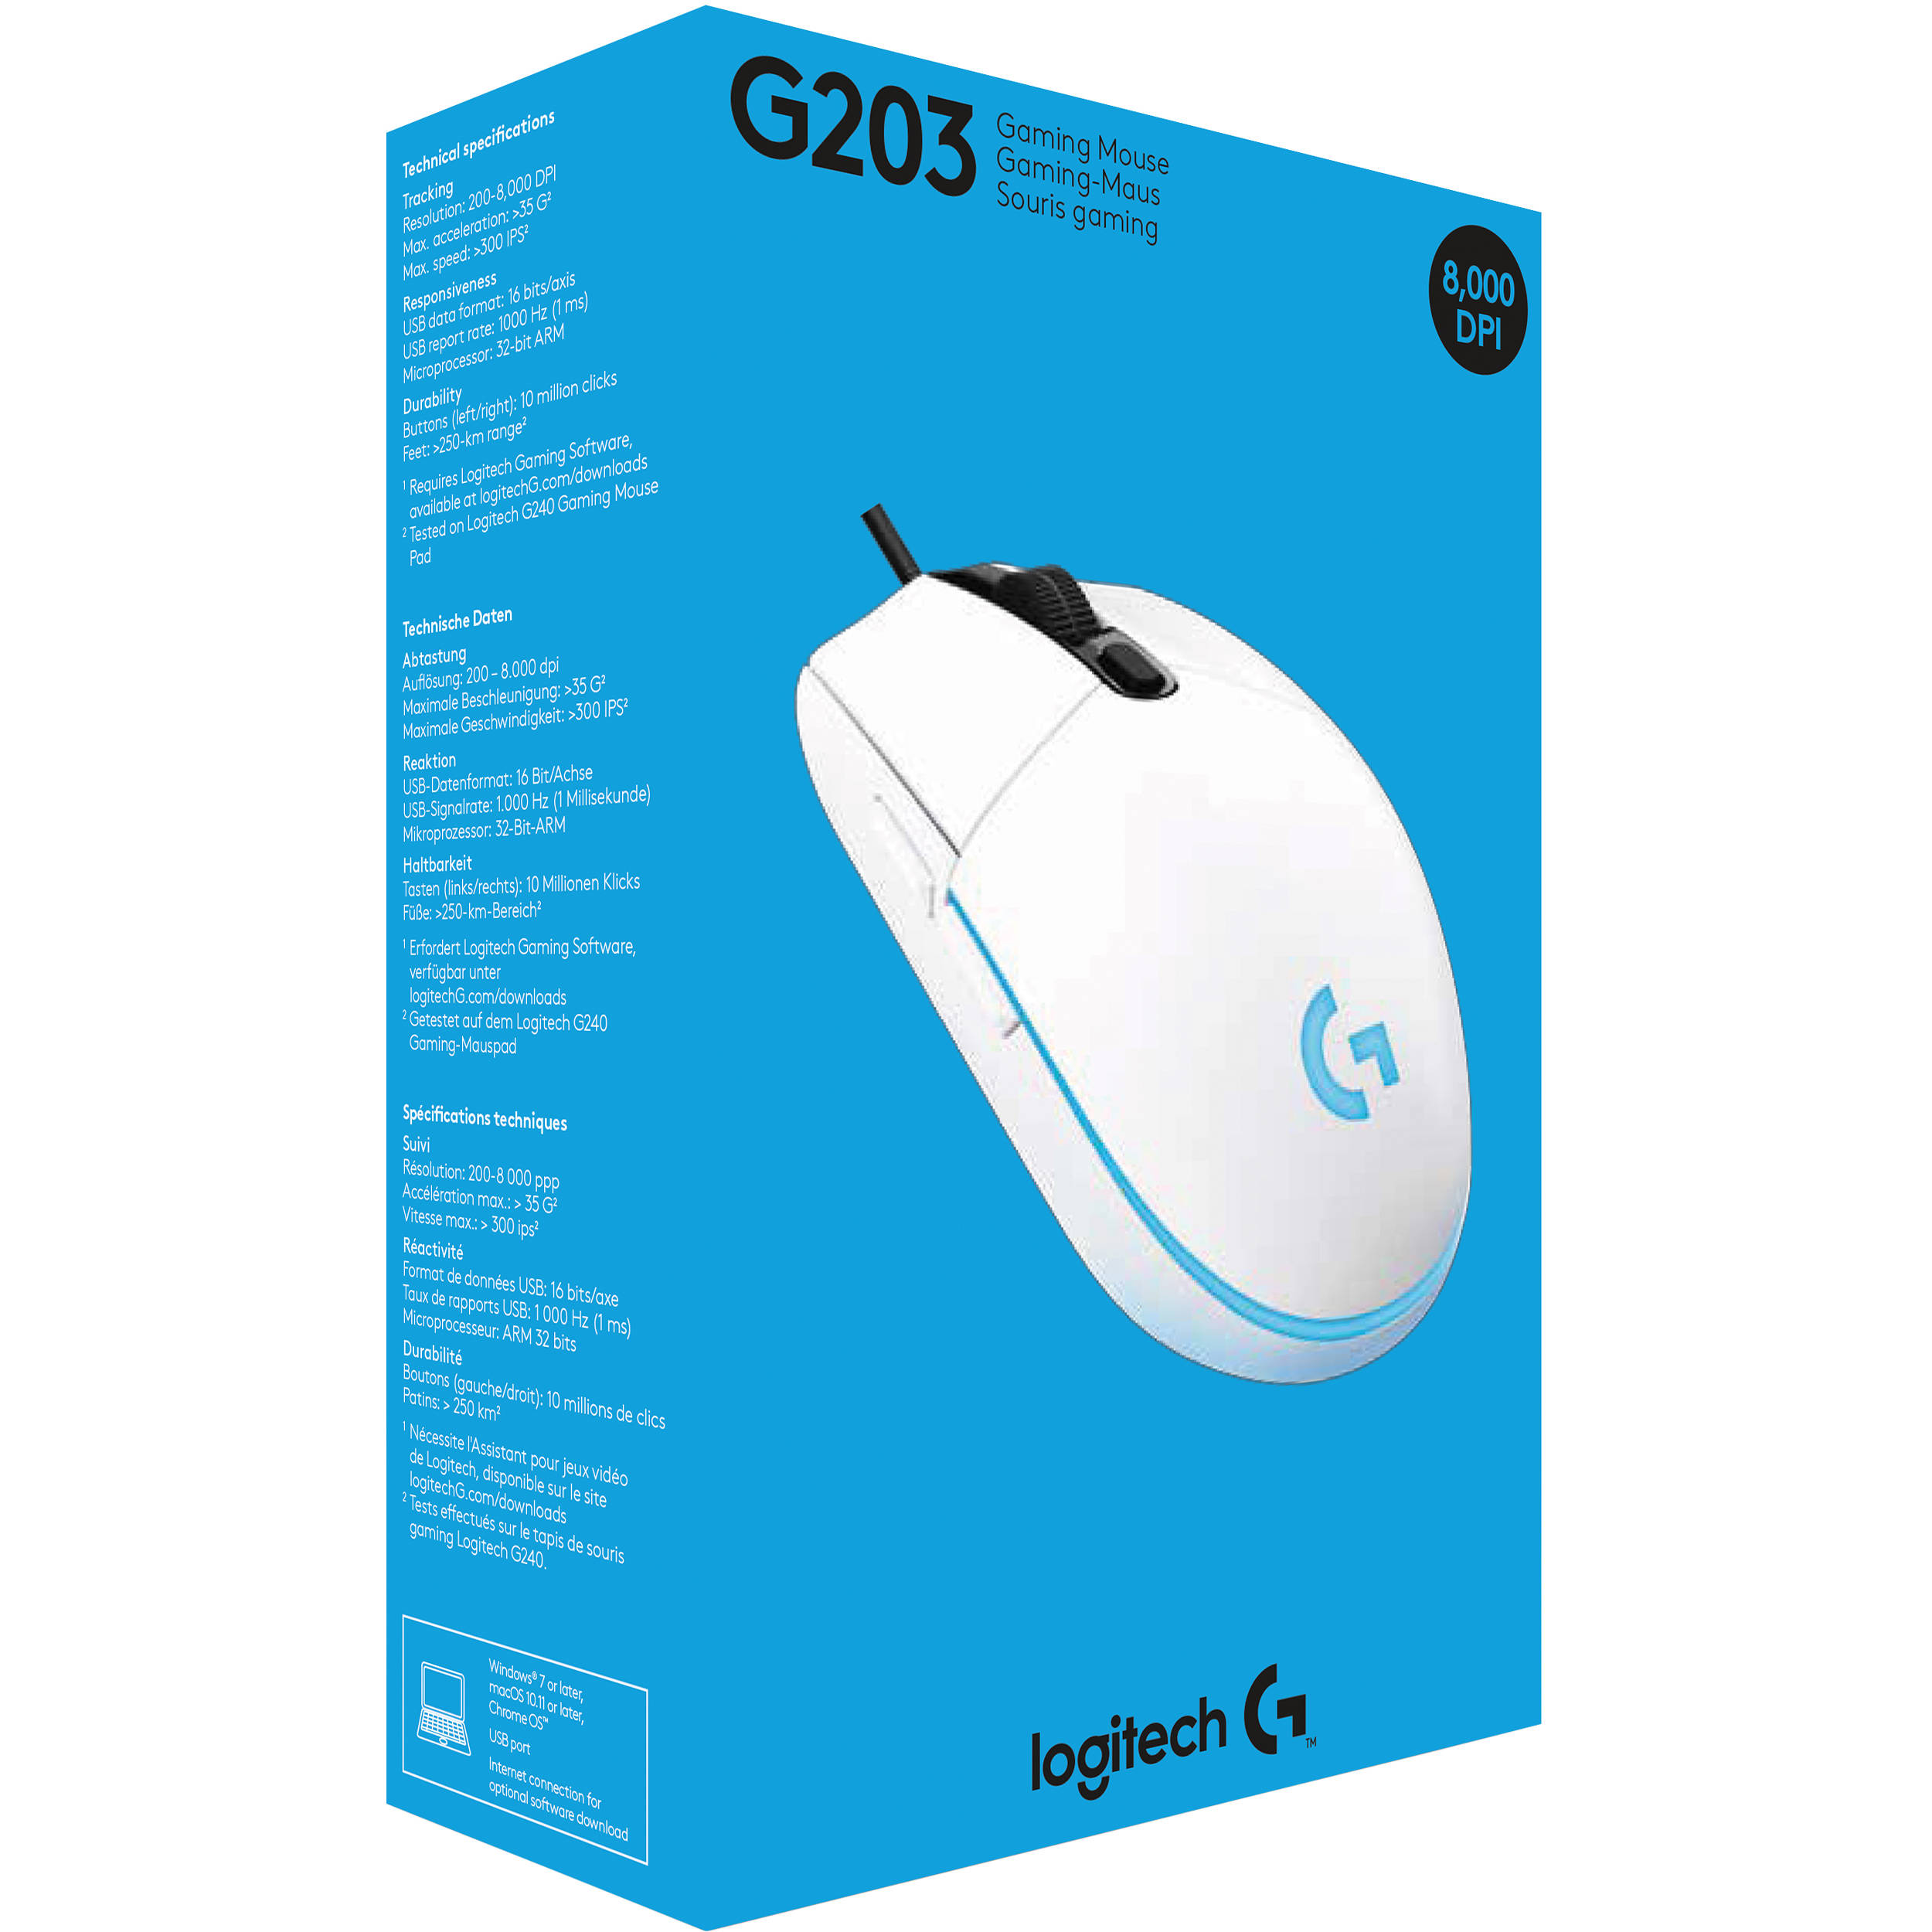 Logitech G203 Software Download / Logitech G203 Software For Pc Tech Vom / Hy, if you want to download logitech gaming software g203 download, driver, manual, setup, you just come here because we have provided the download link below.